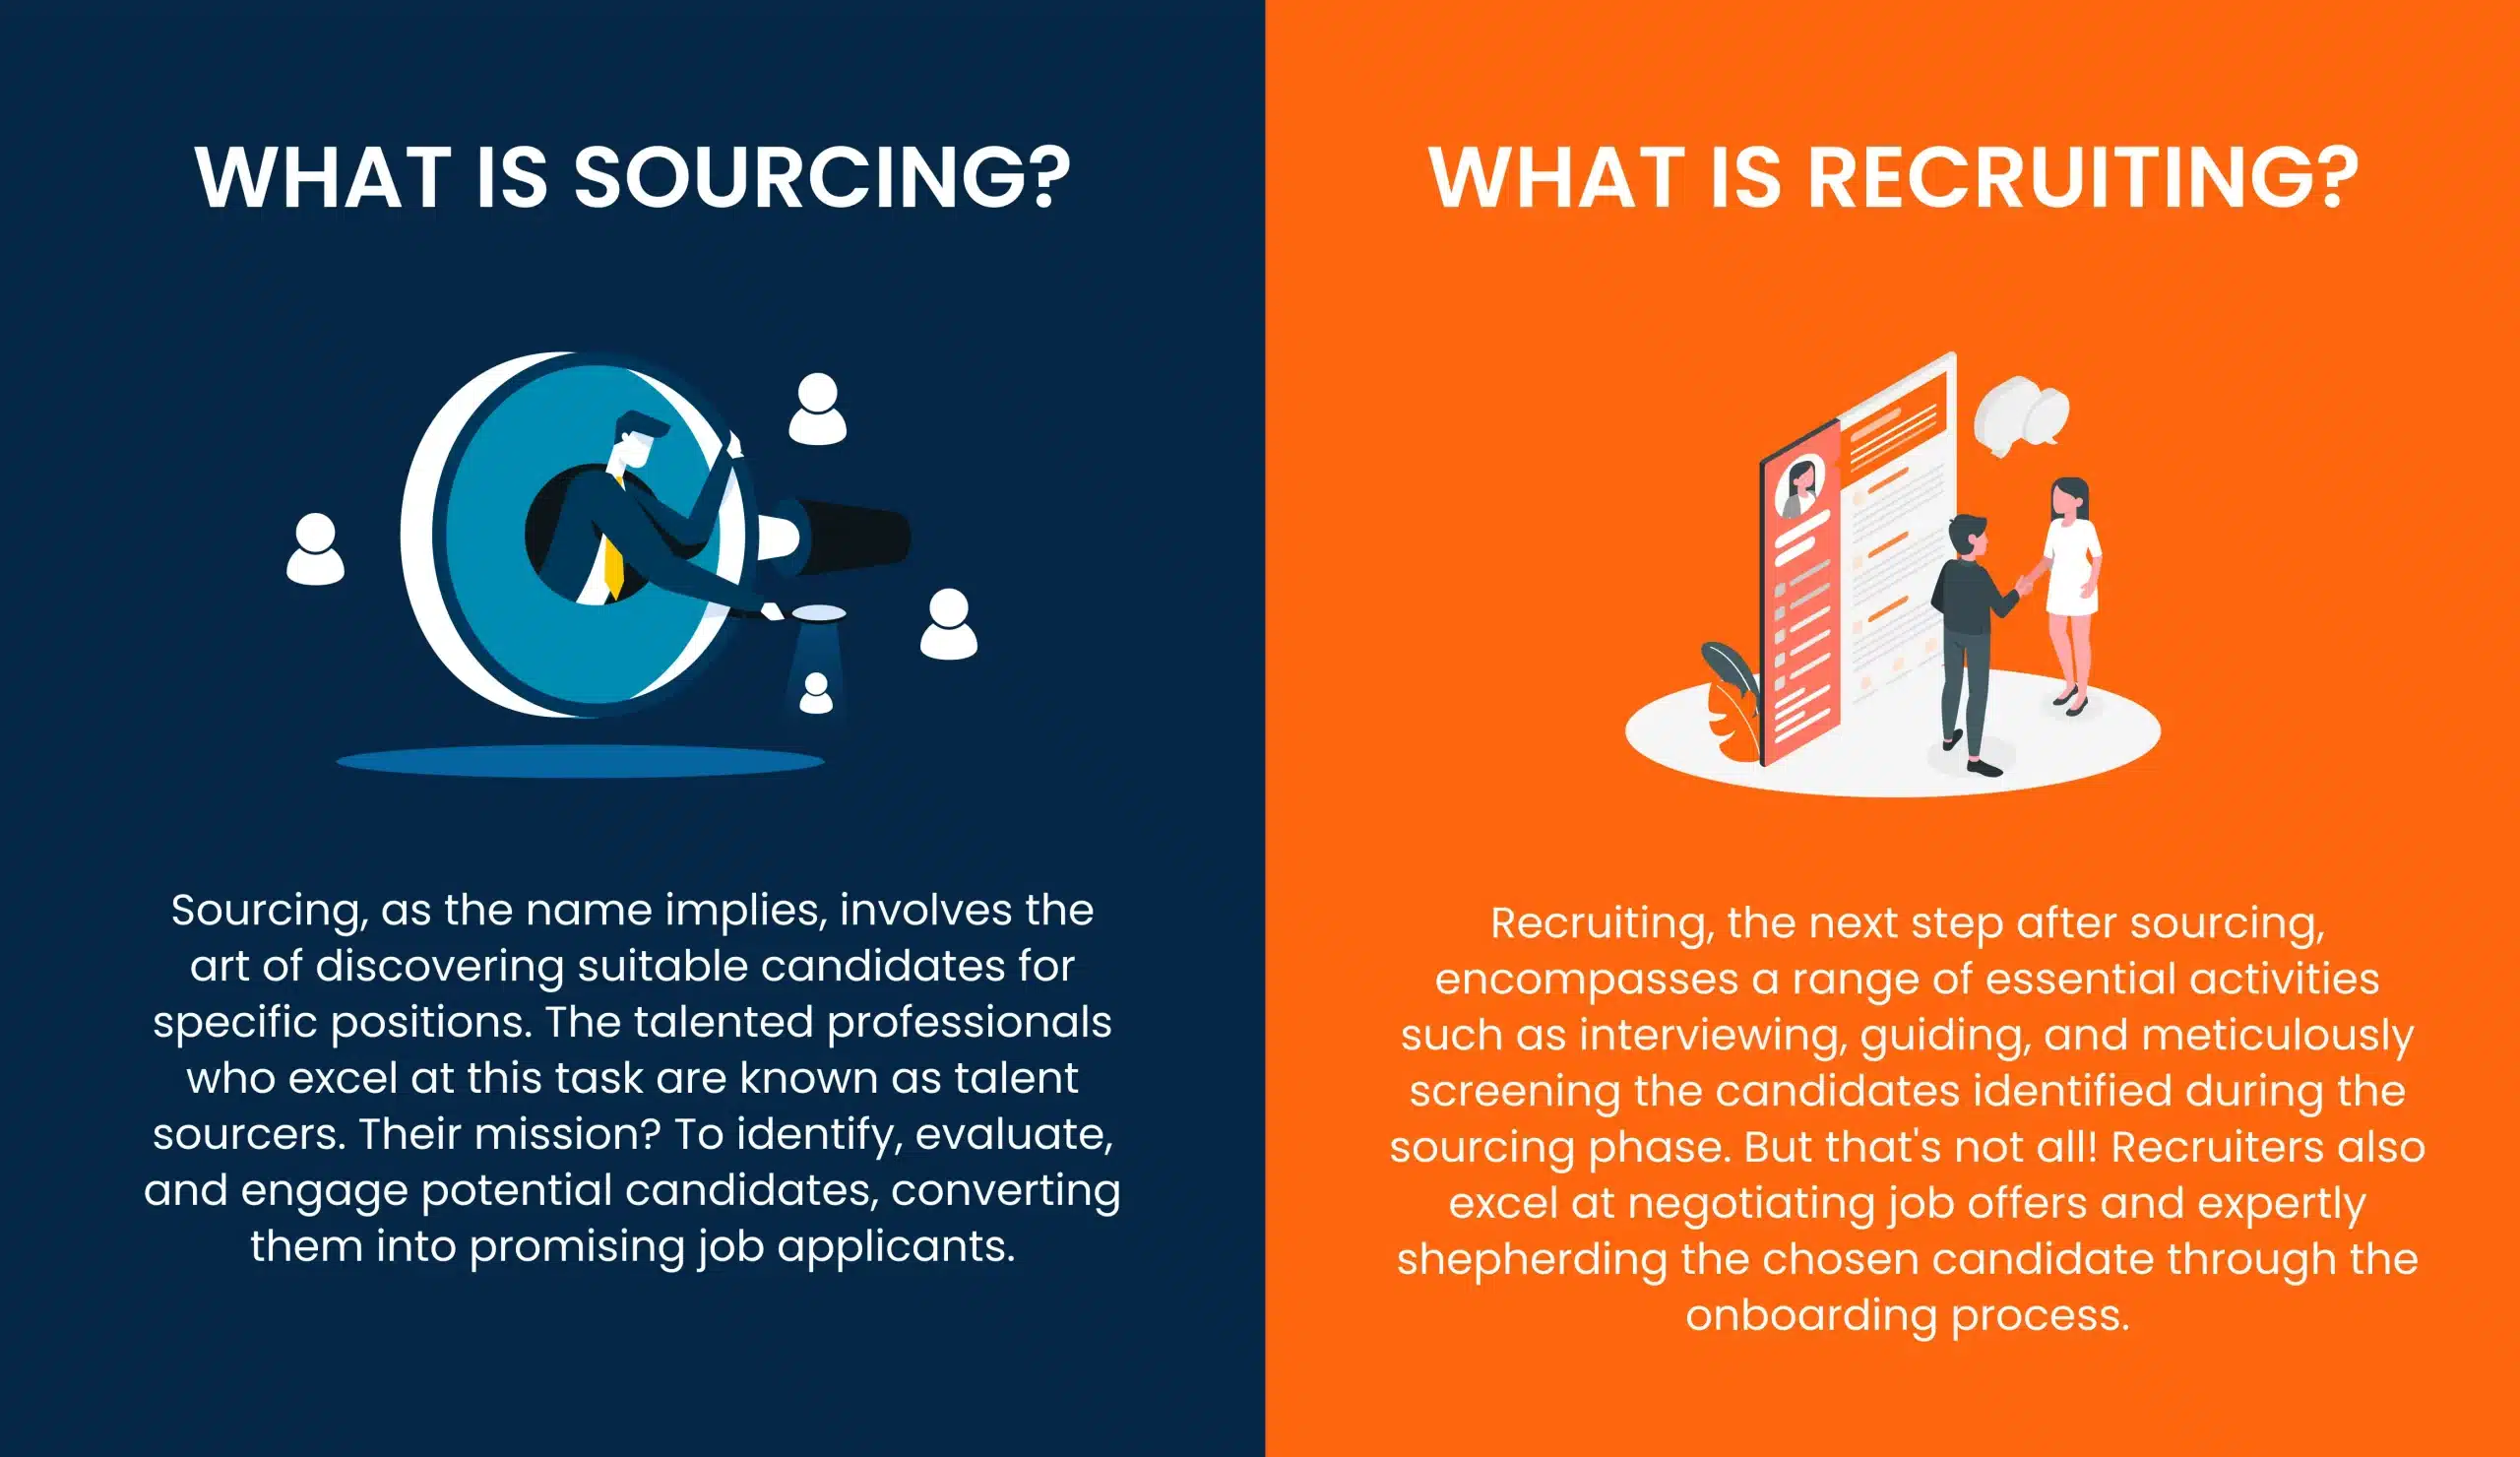 Sourcing and recruiting